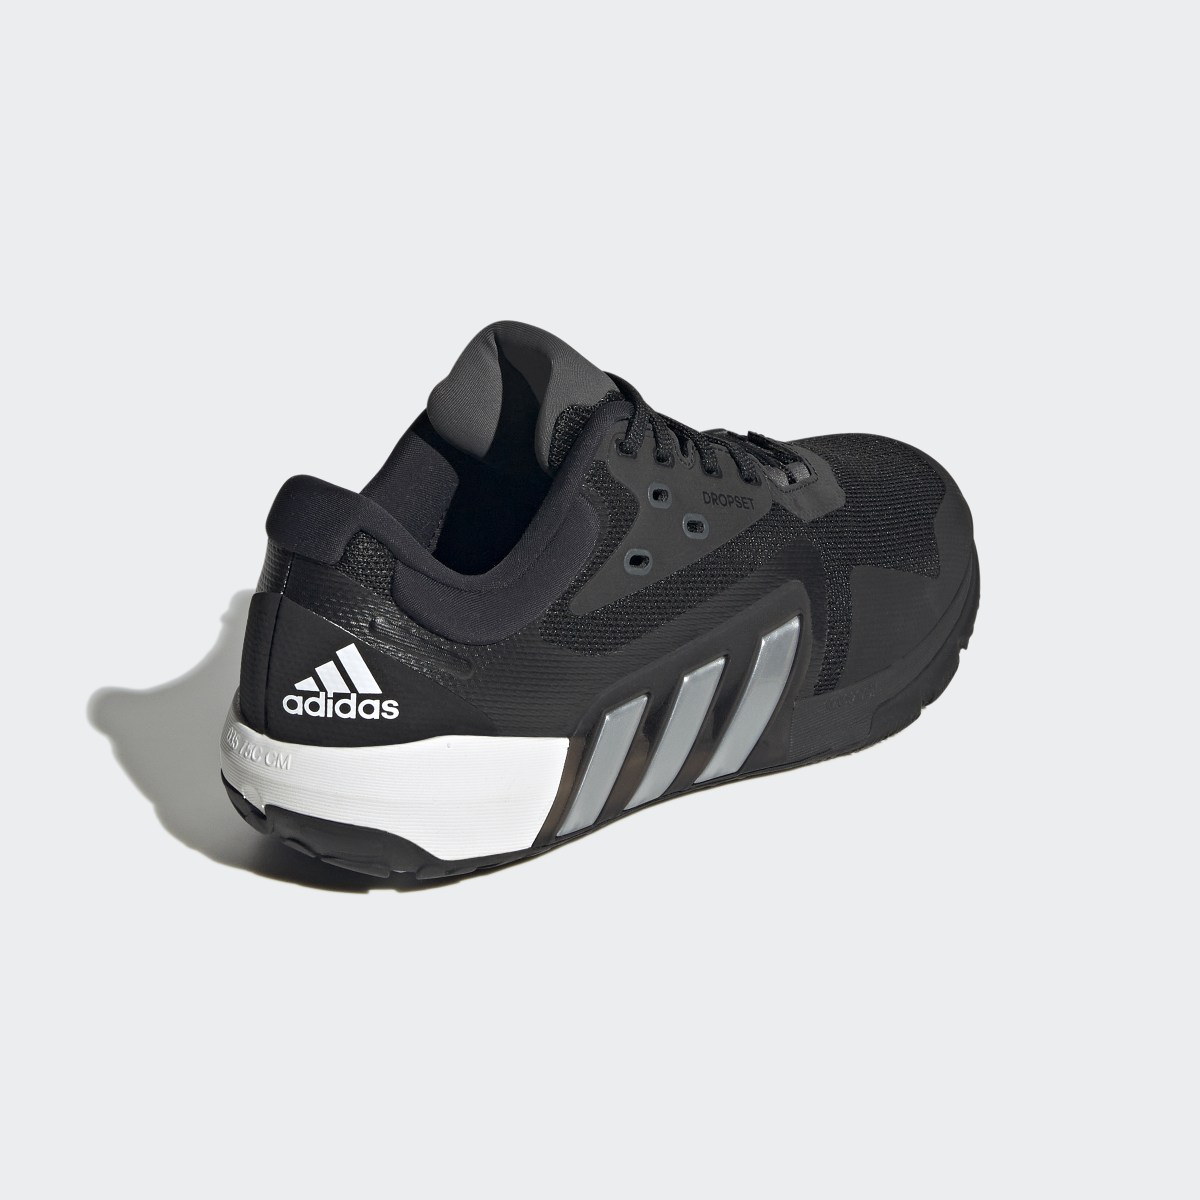 Adidas Dropset Trainer Shoes. 9